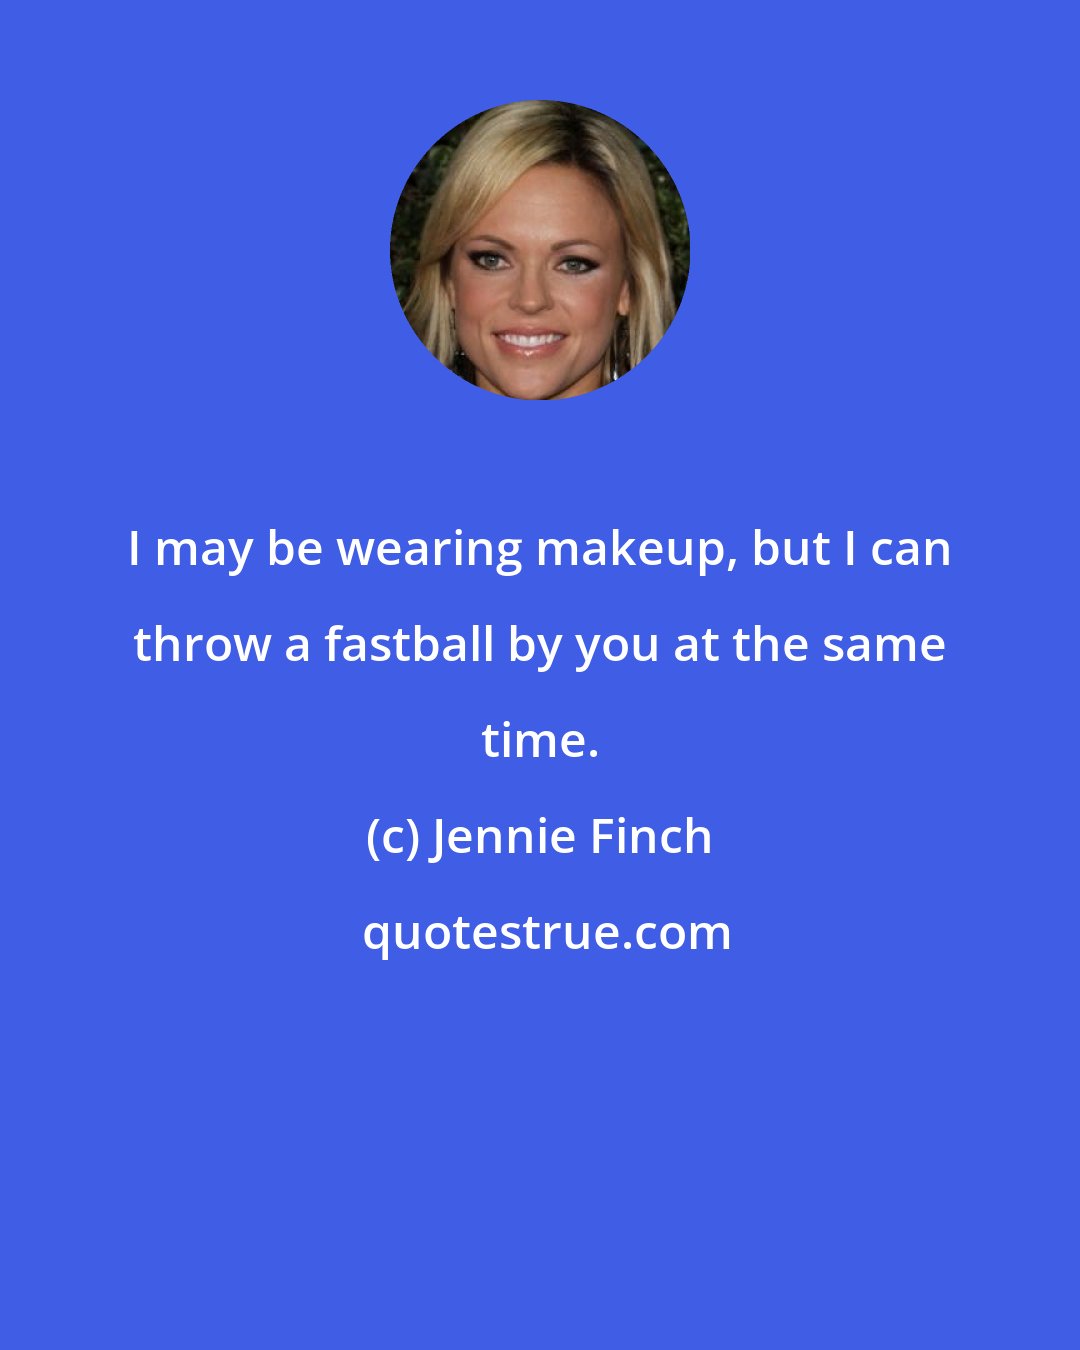 Jennie Finch: I may be wearing makeup, but I can throw a fastball by you at the same time.